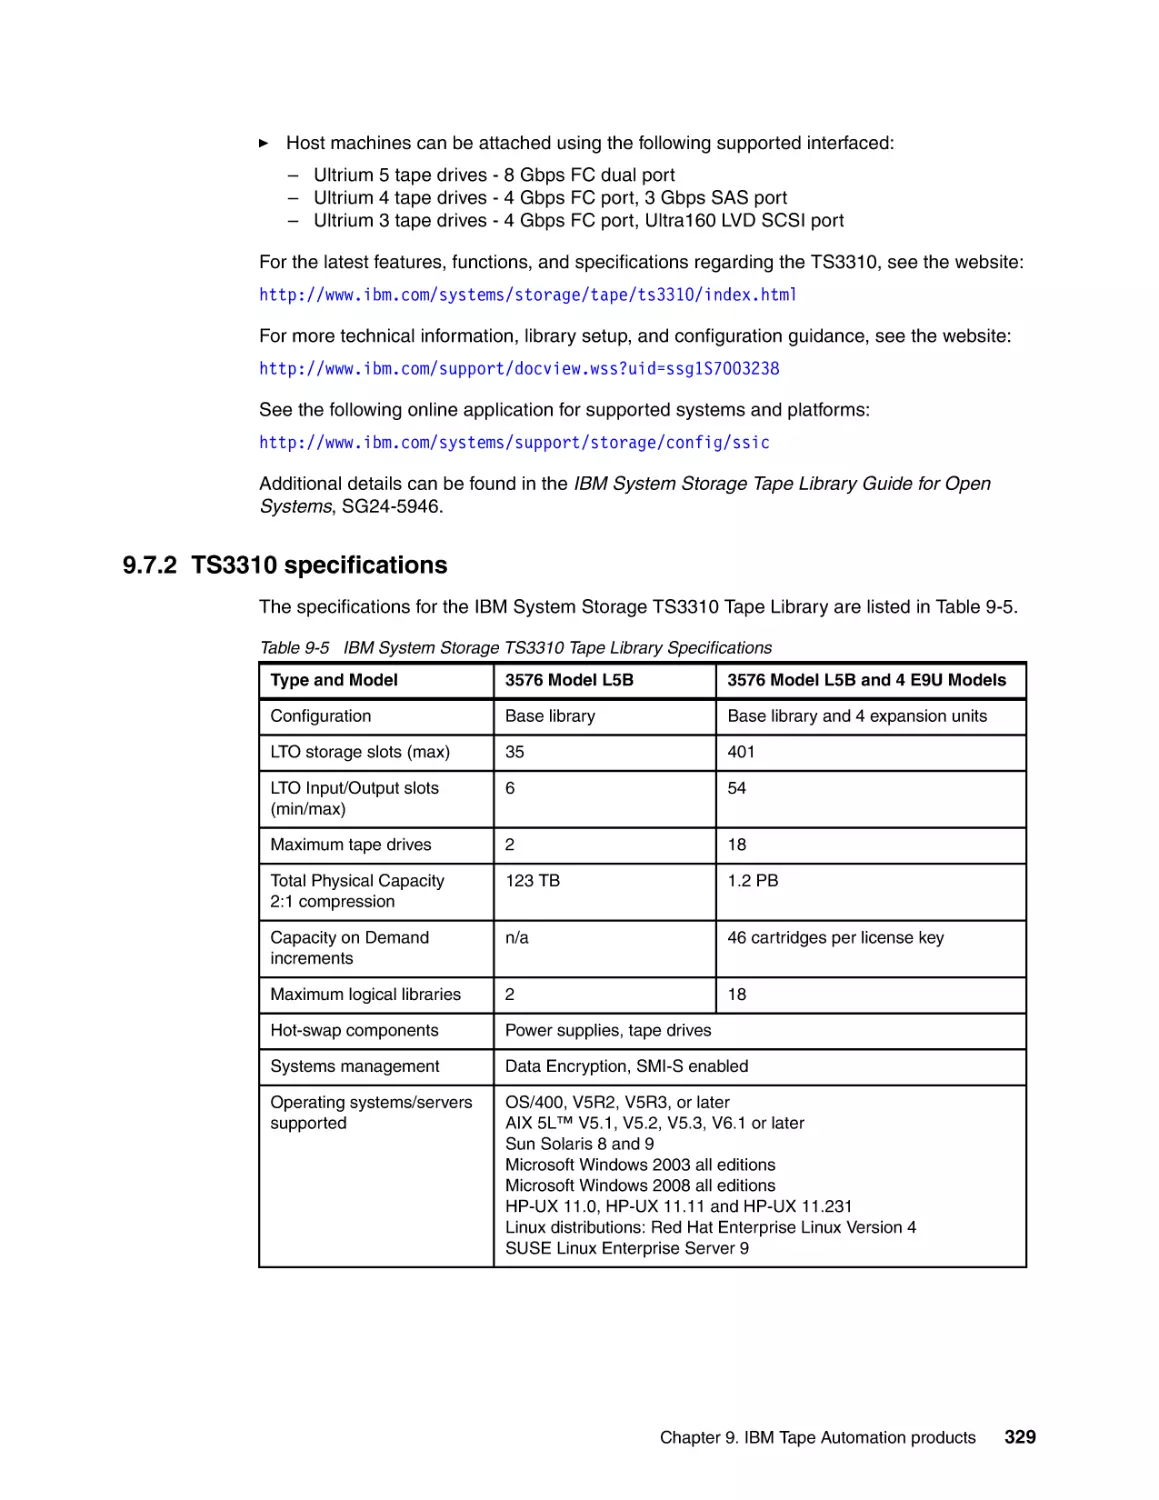 9.7.2 TS3310 specifications